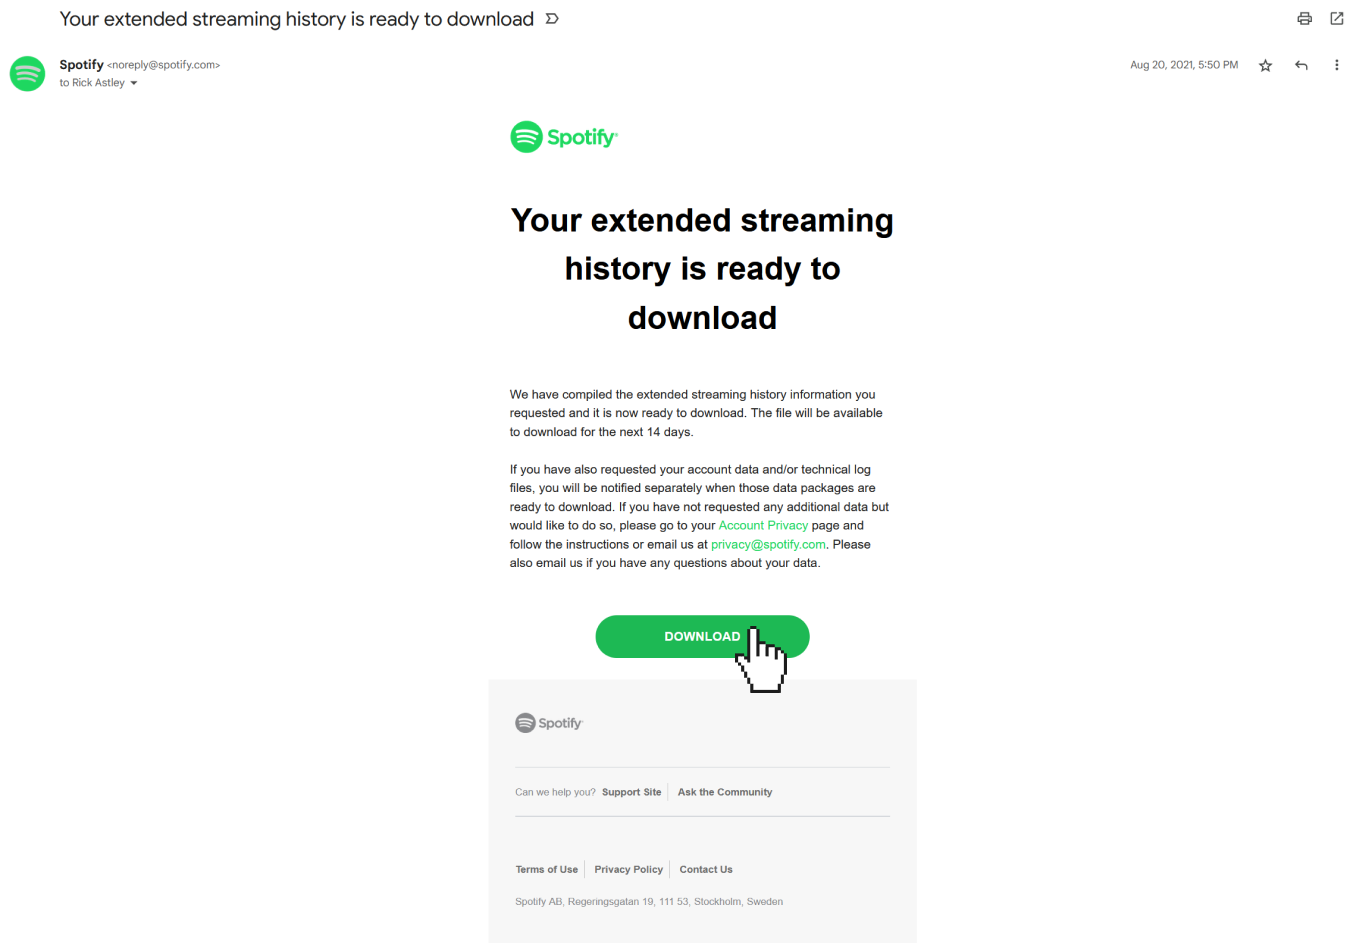 Extendend streaming history data in your mail inbox